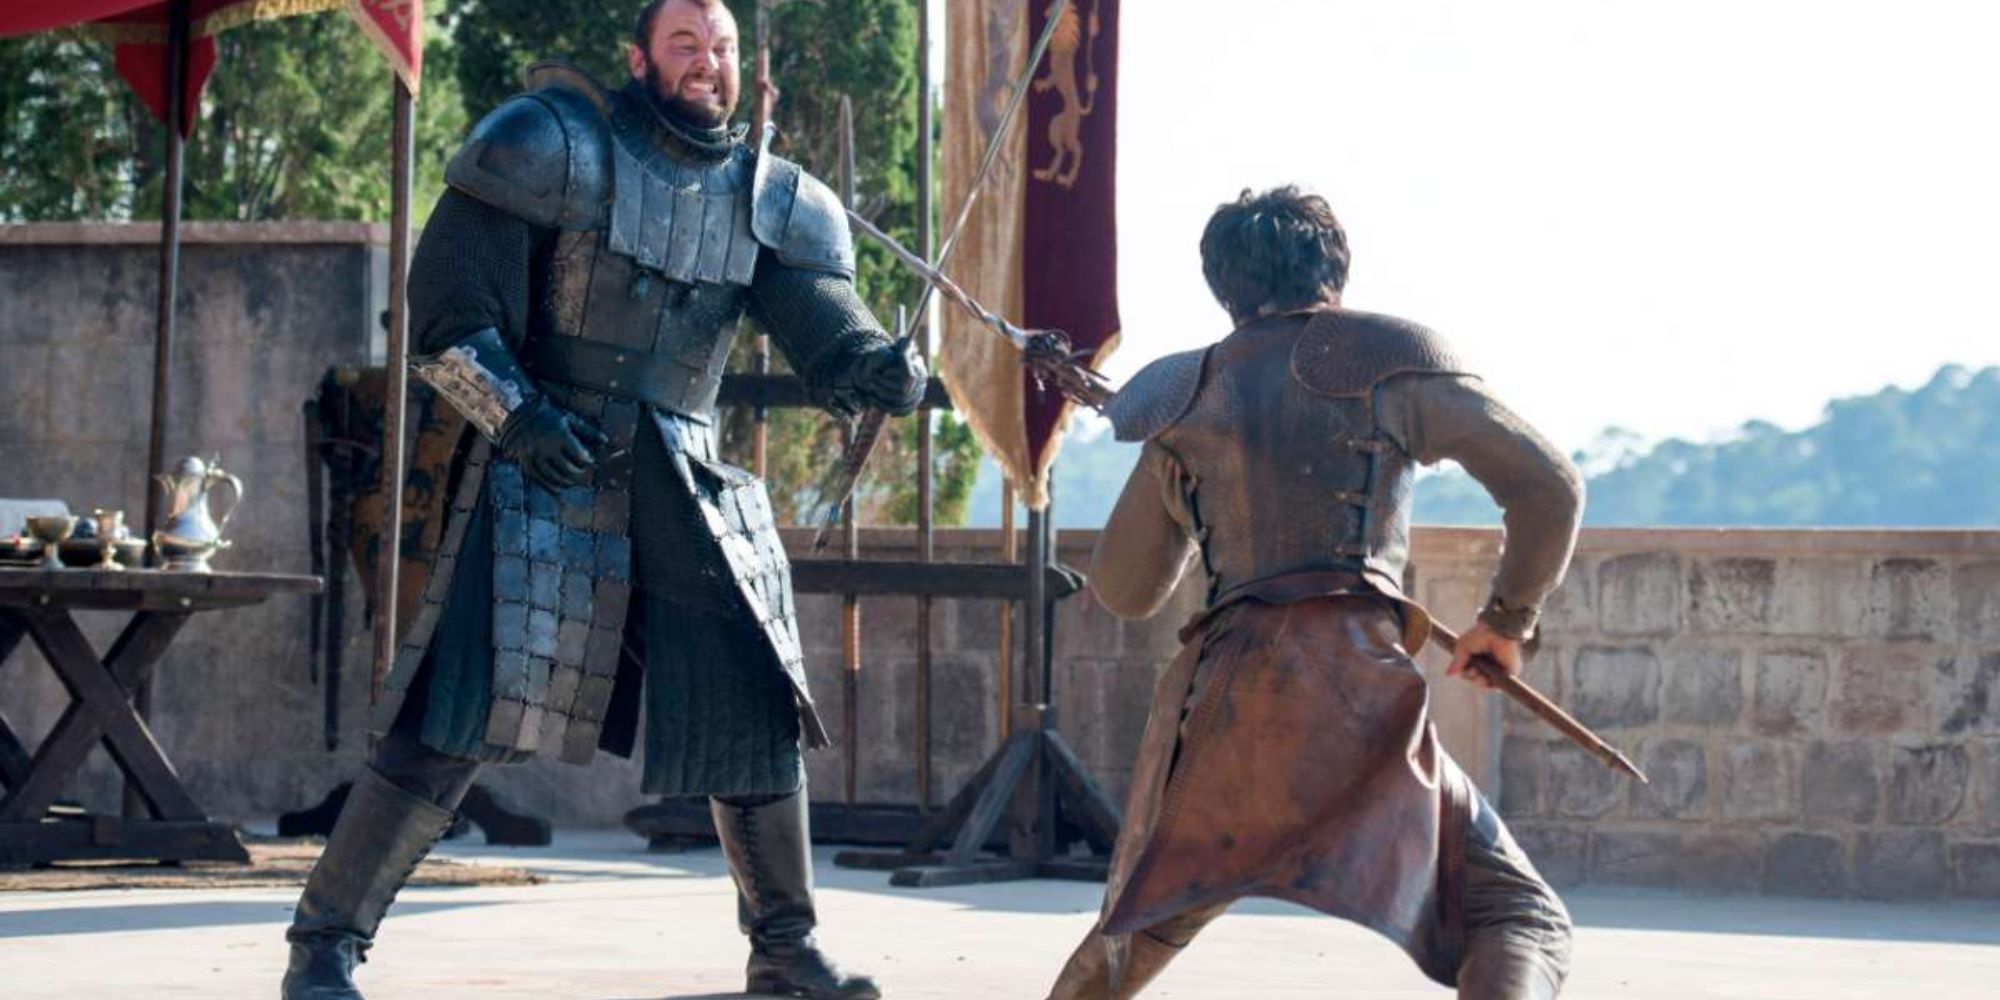 The Mountain and the Viper face off in Game of Thrones